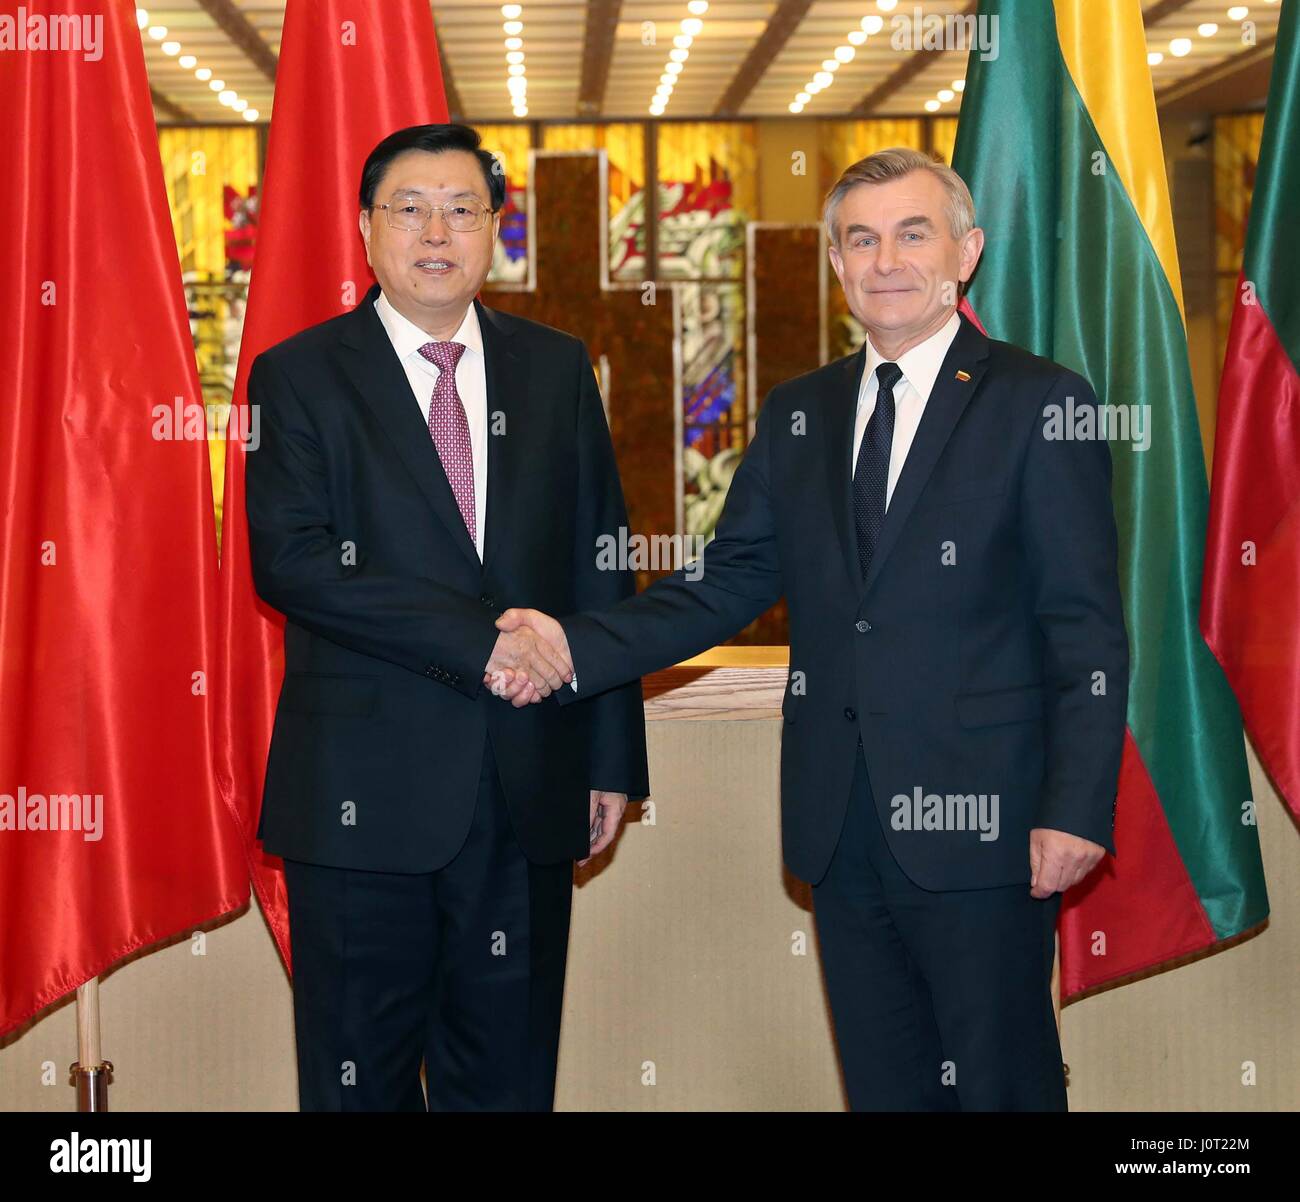 (170416) -- VILNIUS, April 16, 2017 (Xinhua) -- Zhang Dejiang (L), chairman of the Standing Committee of China's National People's Congress, holds talks with Speaker Viktoras Pranckietis of Seimas, the Lithuanian parliament, in Vilnius, capital of Lithuania, April 14, 2017. Zhang paid an official goodwill visit to Lithuania on April 14-16. (Xinhua/Liu Weibing) (lb) Stock Photo